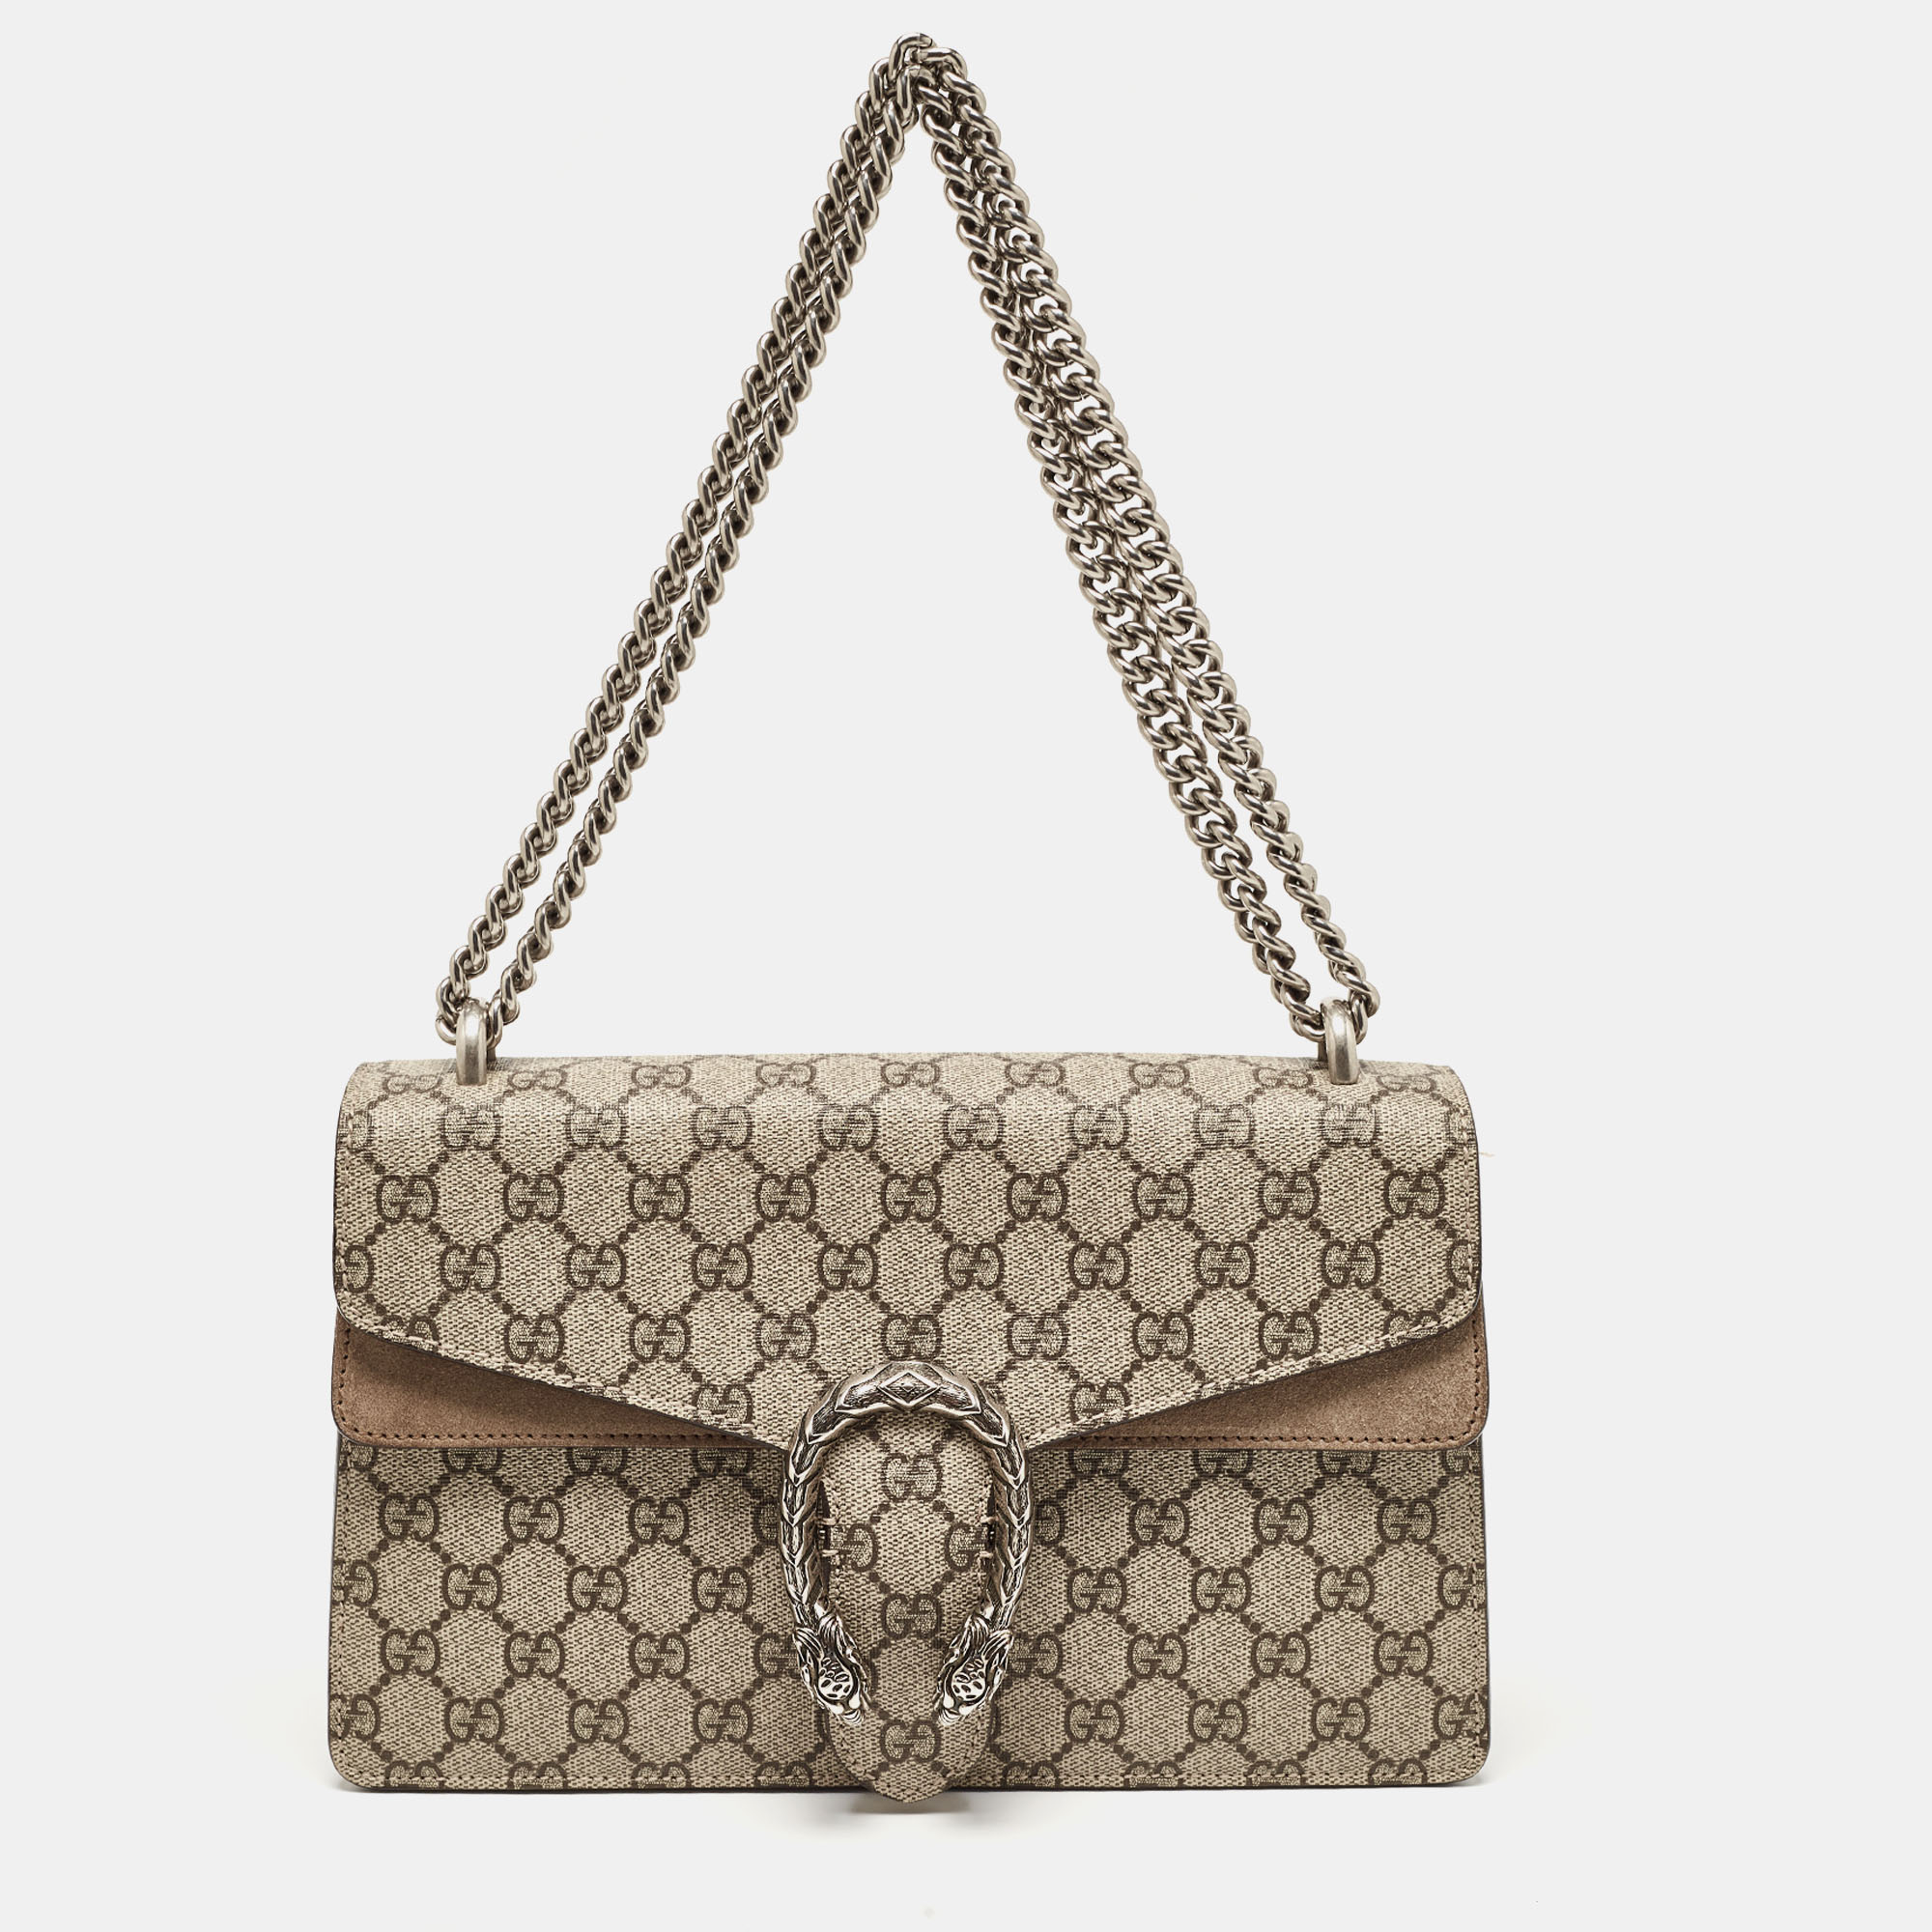 Gucci beige gg supreme canvas and suede small dionysus shoulder bag